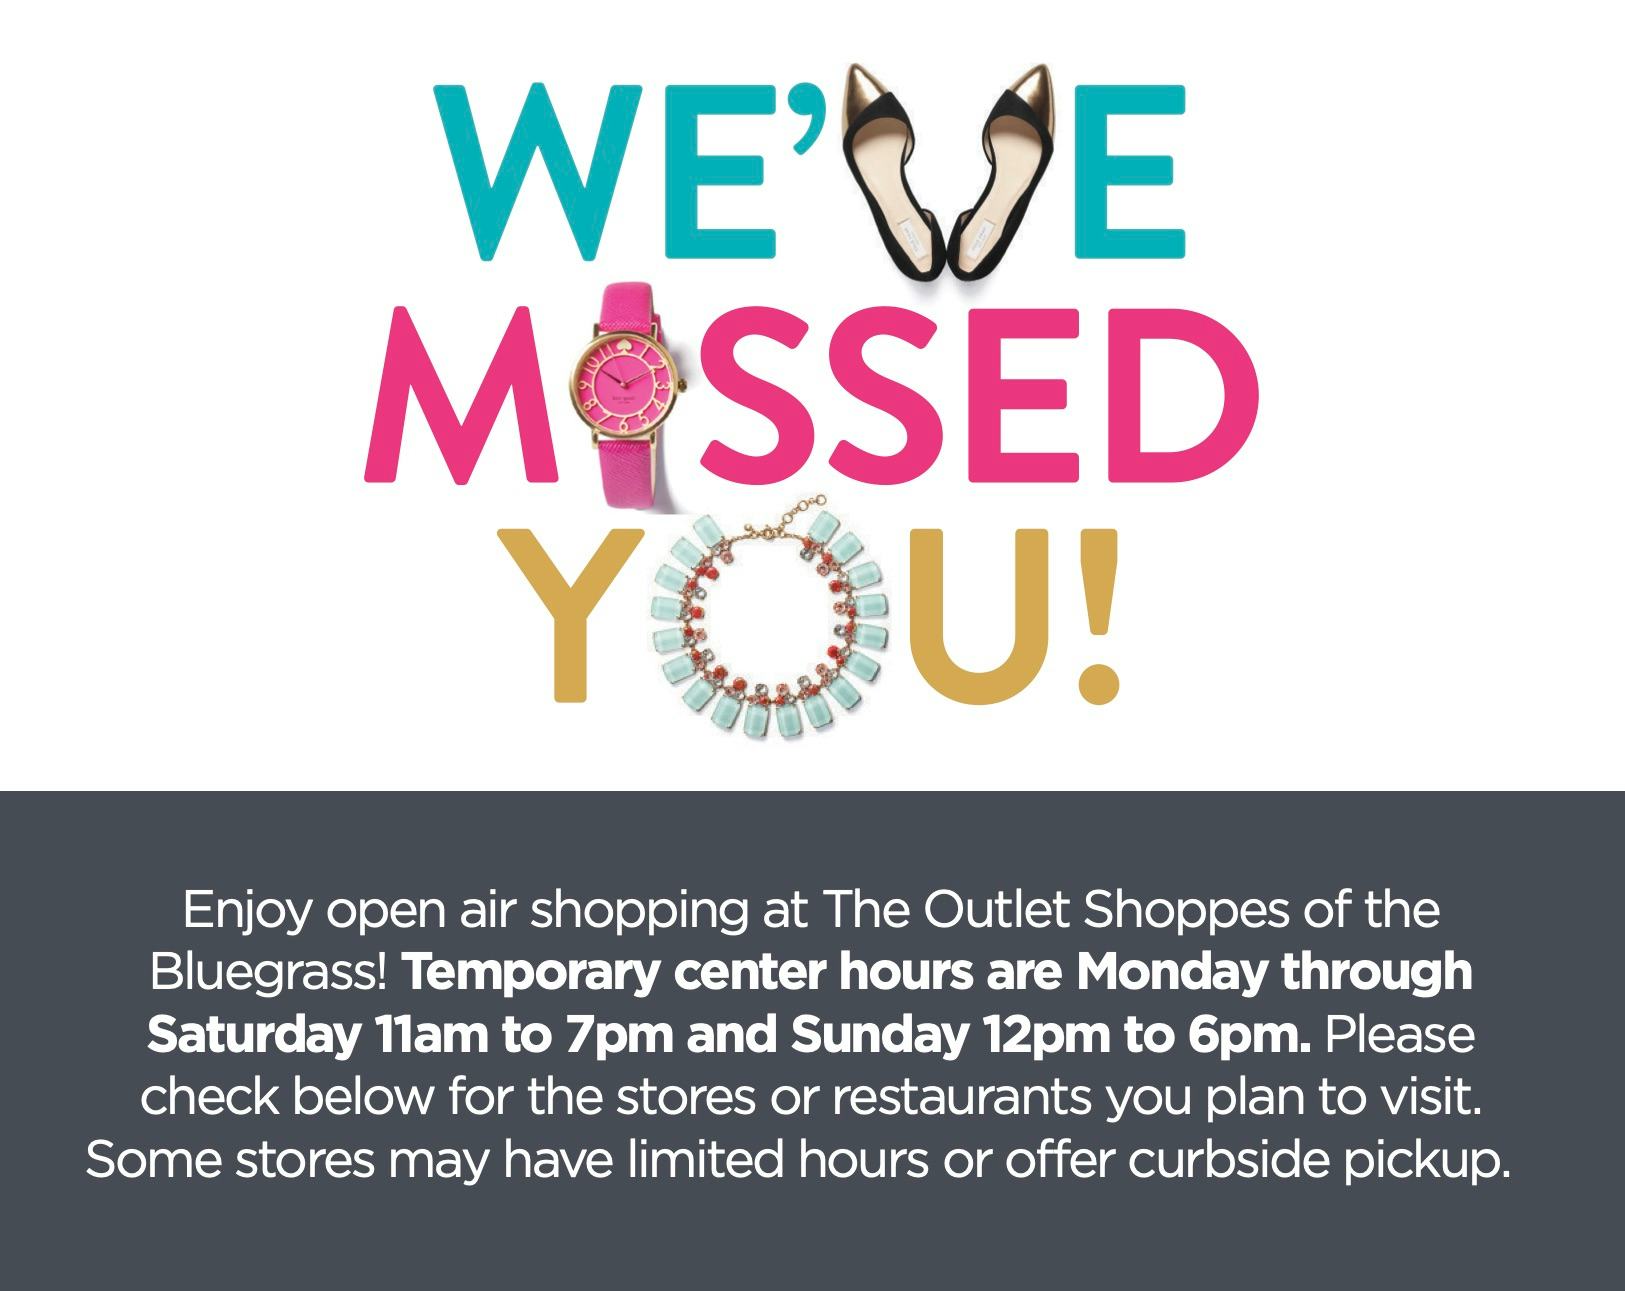 The Outlet Shoppes of the Bluegrass 